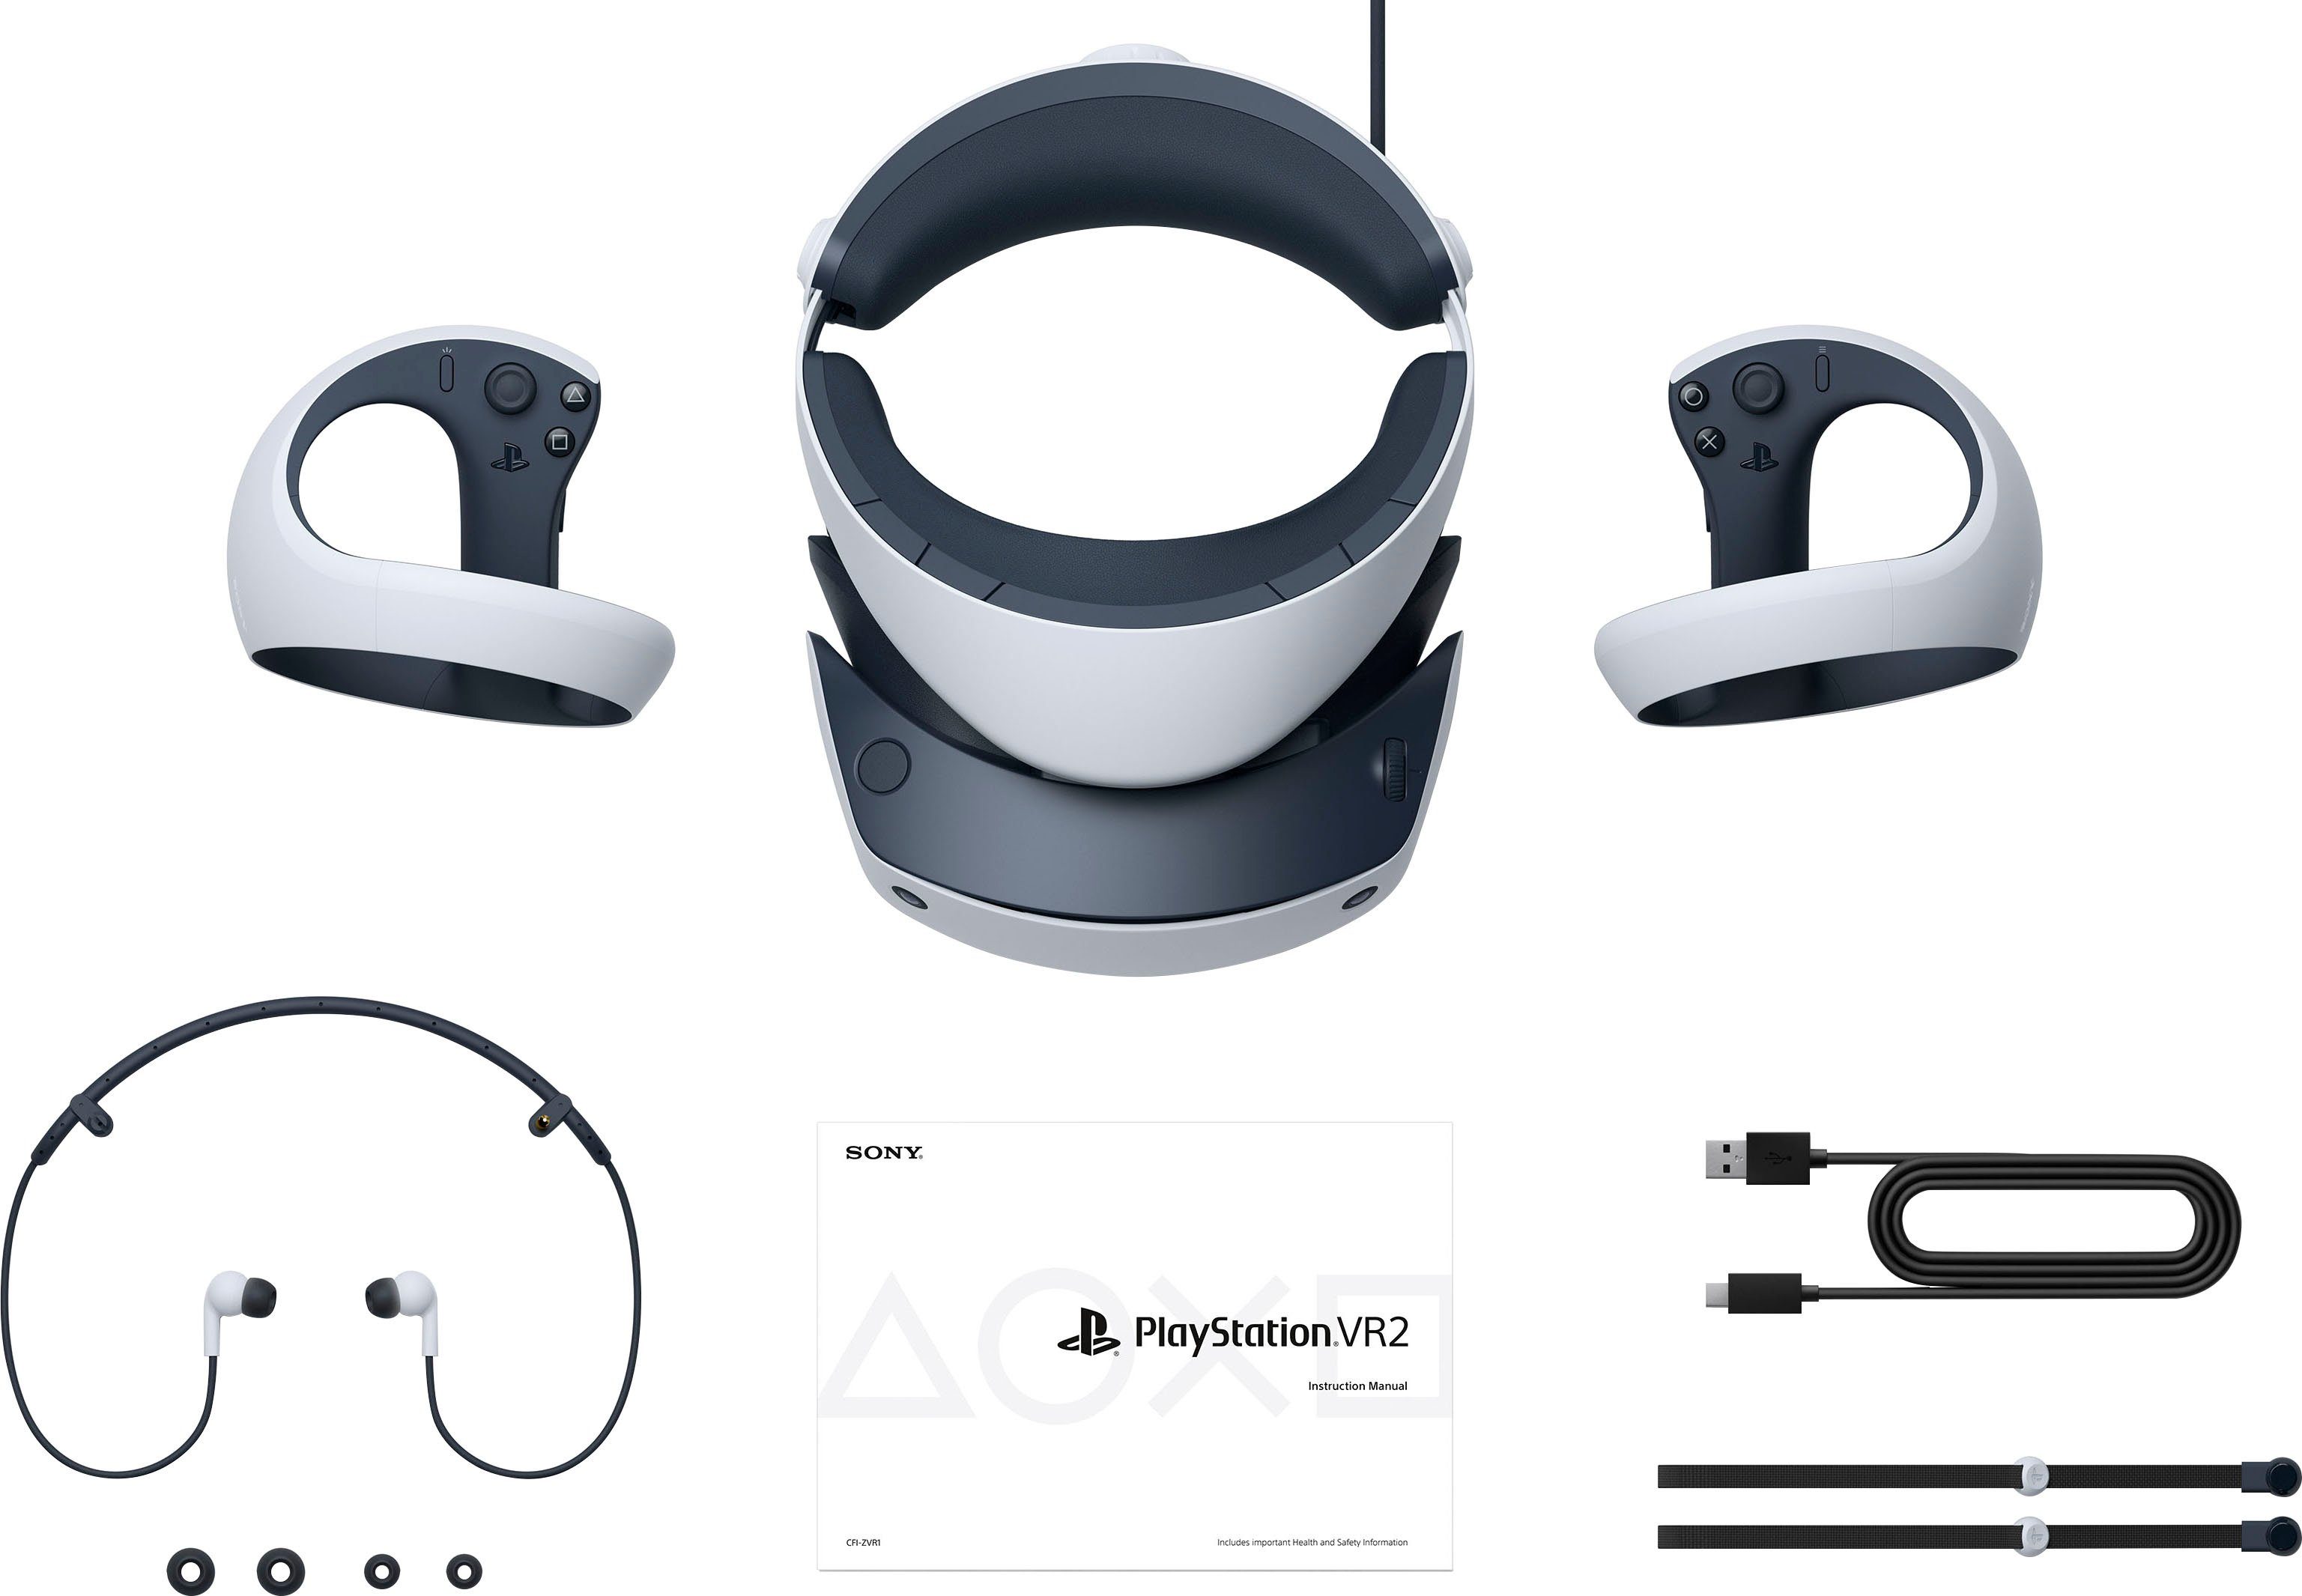 px) (3840 x Horizon Sony 2160 of Mountain-Bundle™ the Call PlayStation®VR2 Virtual-Reality-Brille